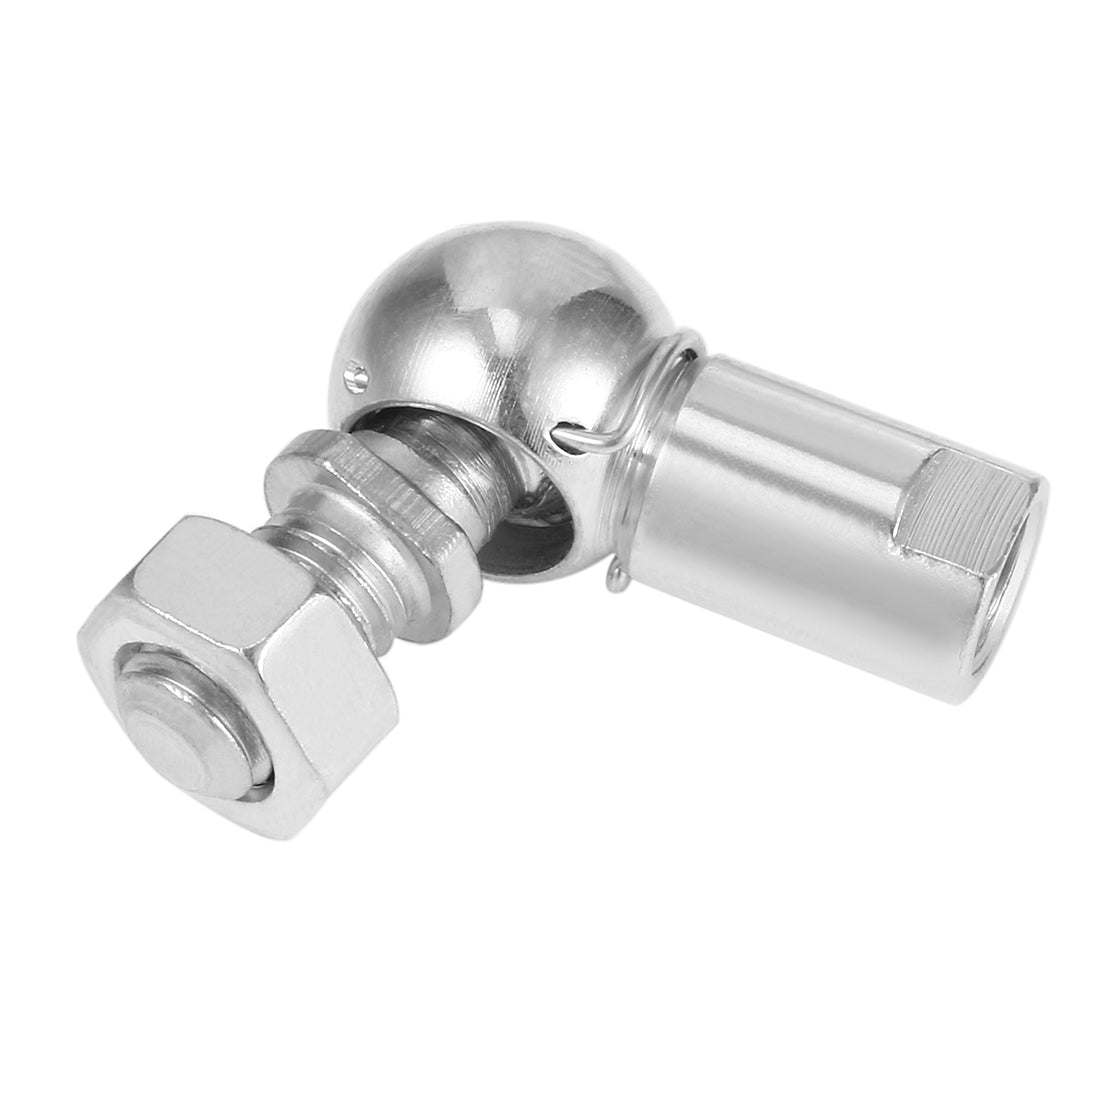 uxcell Uxcell CS8, Rod End Ball Bearing with Stud, M5x0.8mm Carbon Steel Right Hand 2pcs